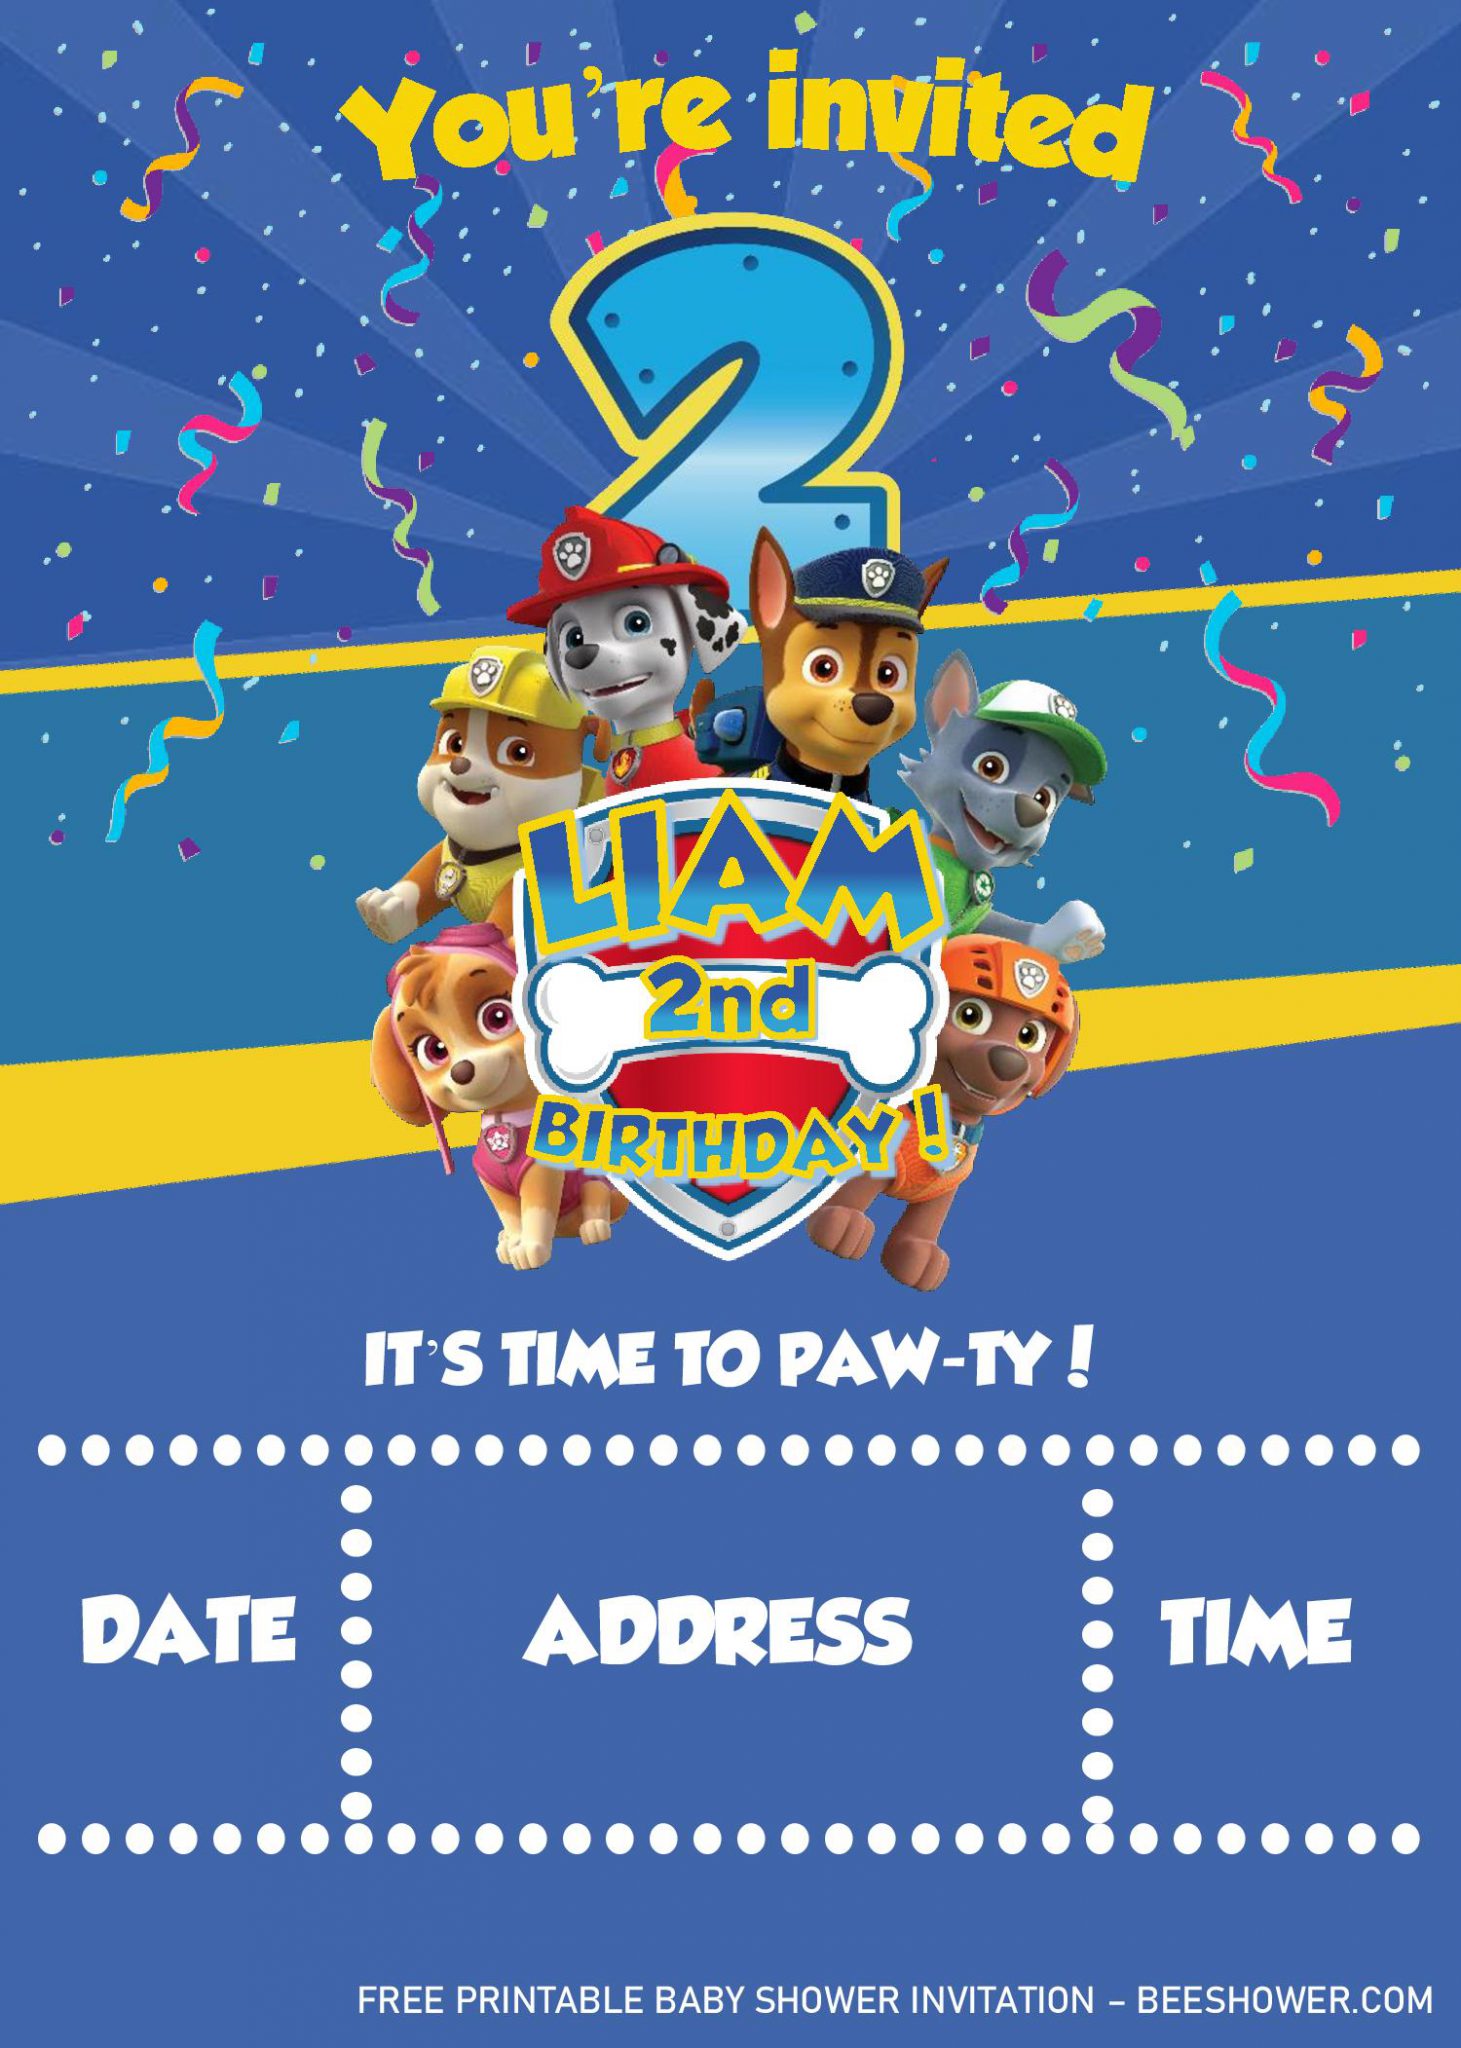 Paw Patrol Invitation Templates – Editable With MS Word | Beeshower